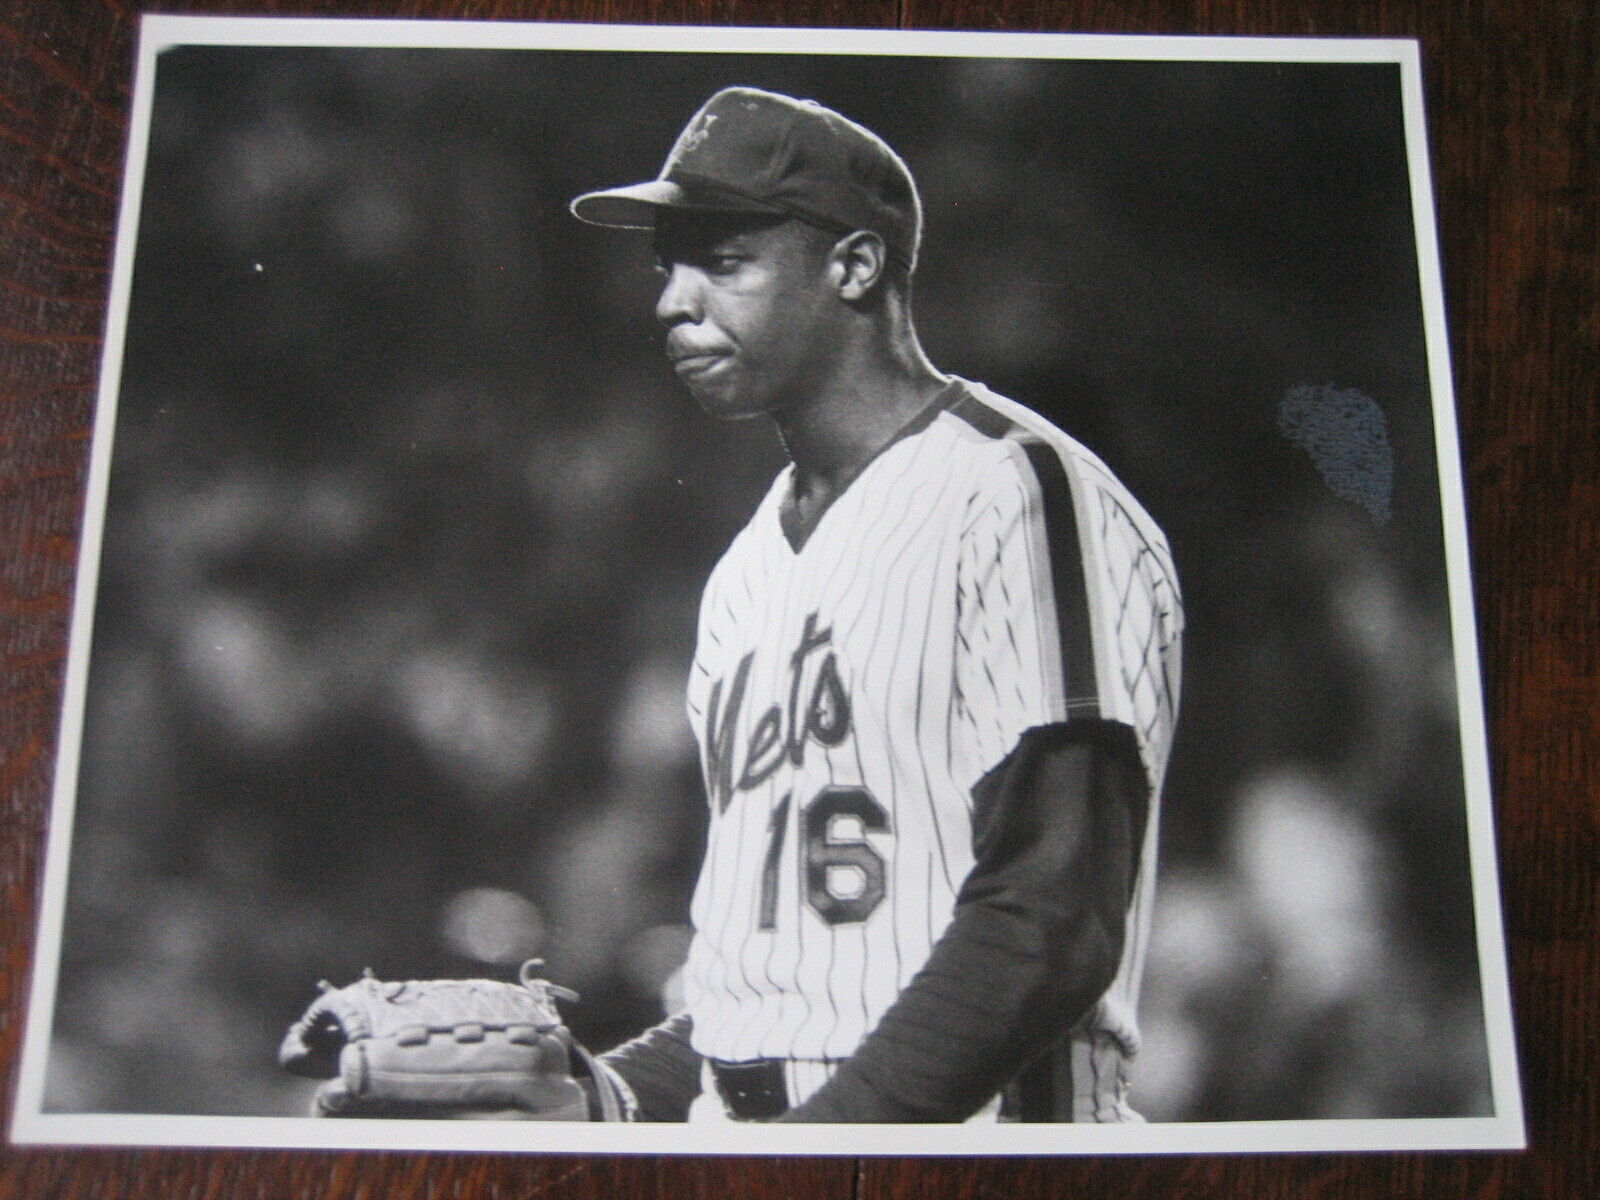 Dwight Gooden May 26 1988 Press Original 11x 13 Photo Poster painting by Bob Olen New York Mets